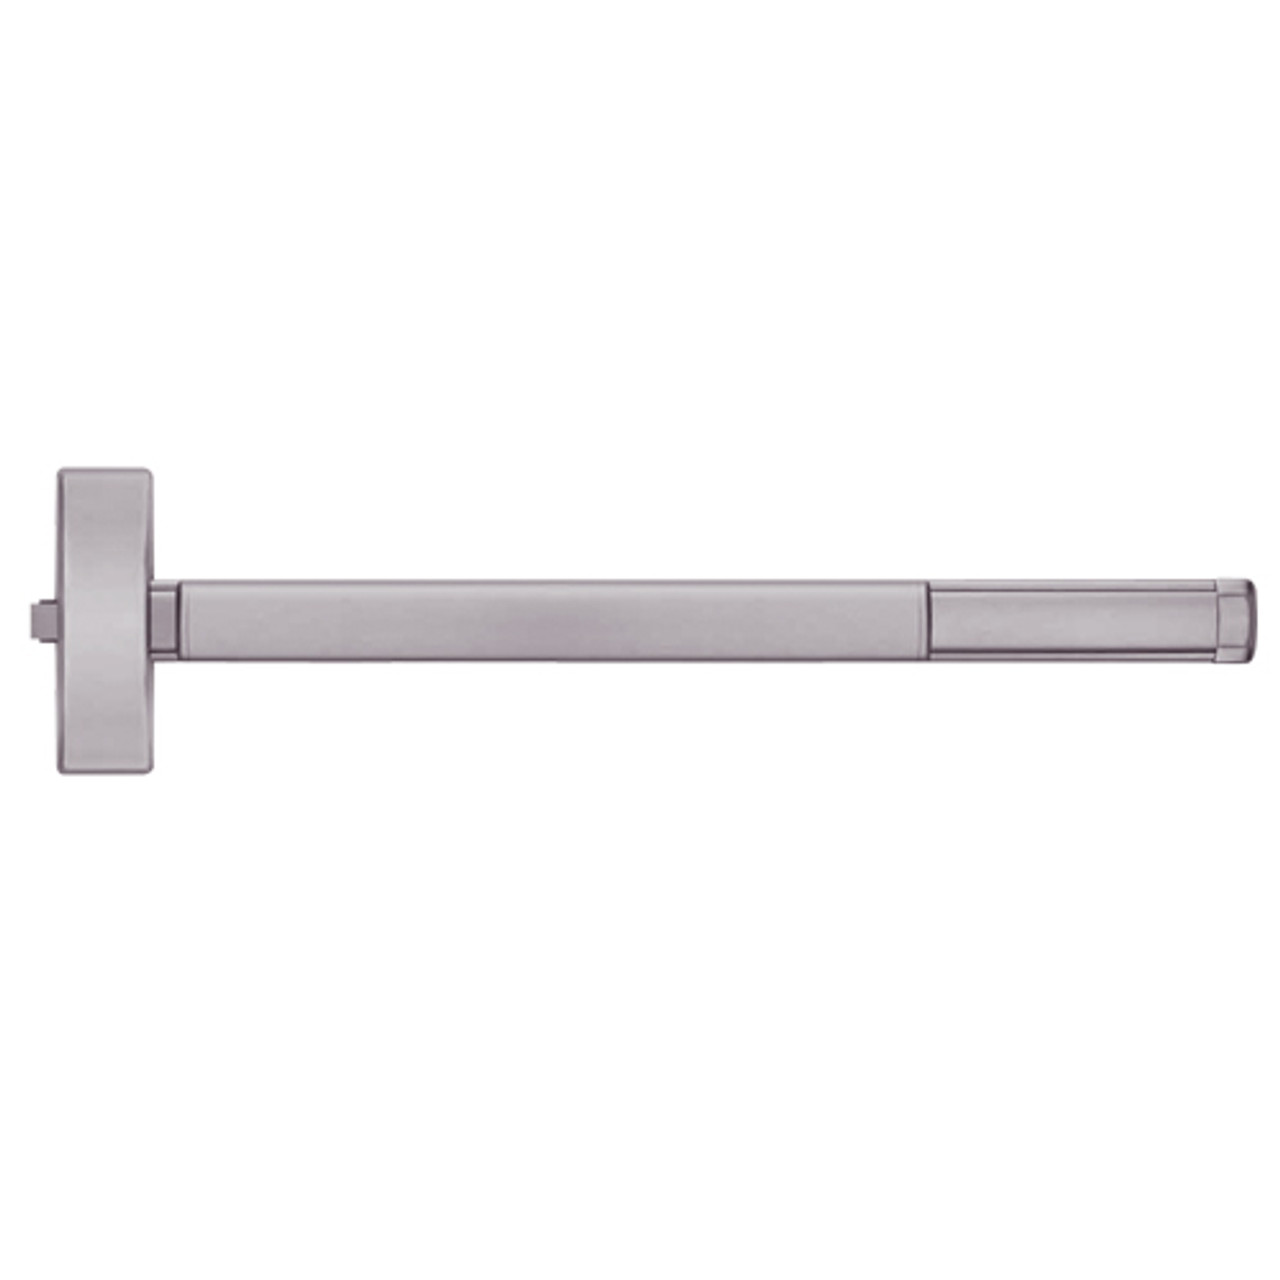 DEFL2108-630-36 PHI 2100 Series Fire Rated Apex Rim Exit Device with Delayed Egress Prepped for Key Controls Lever/Knob in Satin Stainless Steel Finish